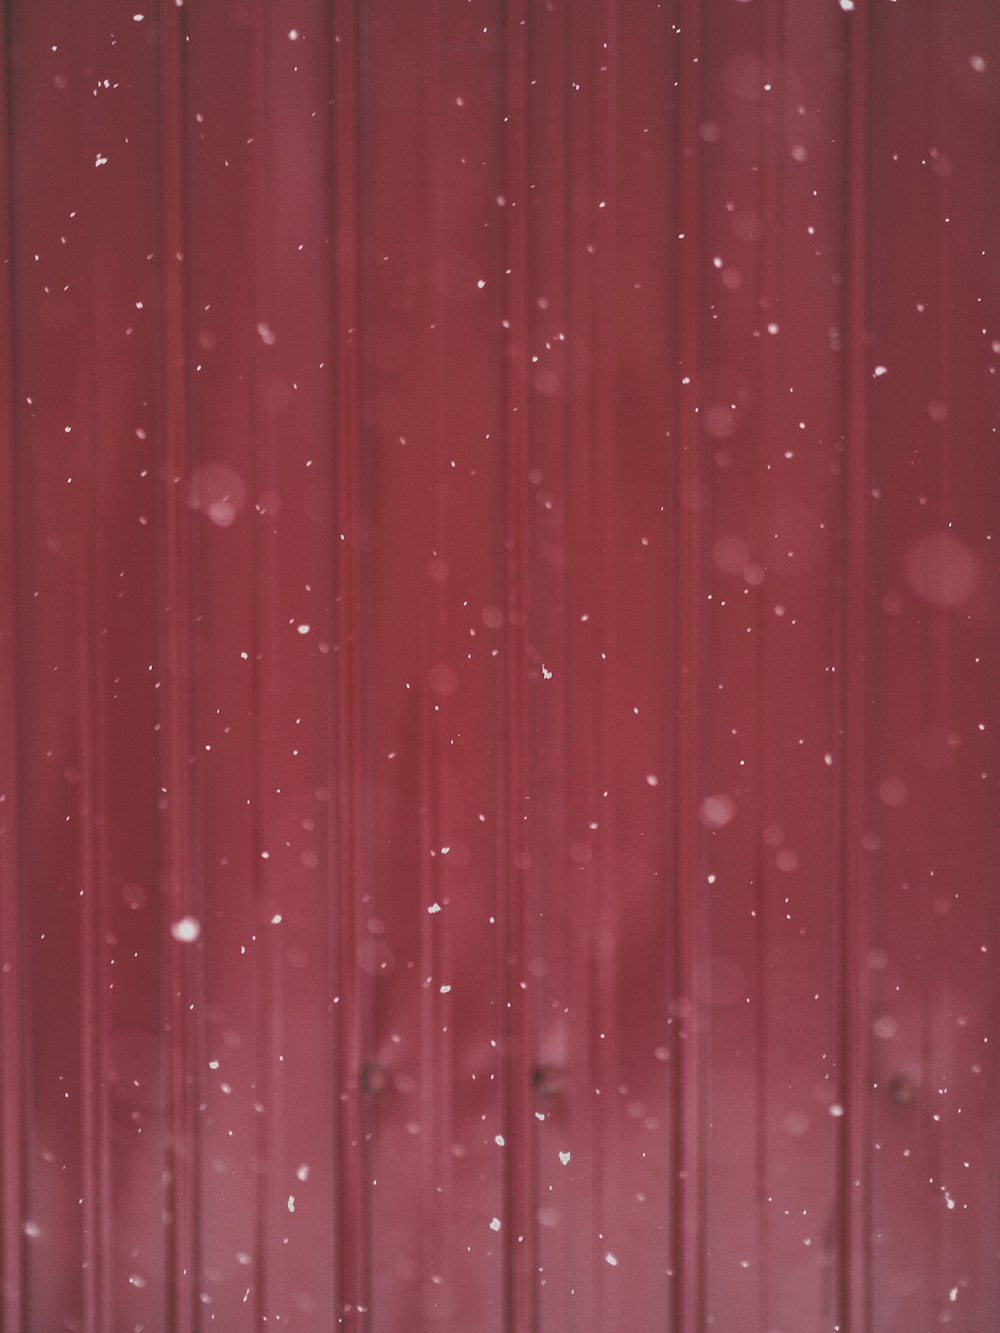 a red wall with snow falling on it